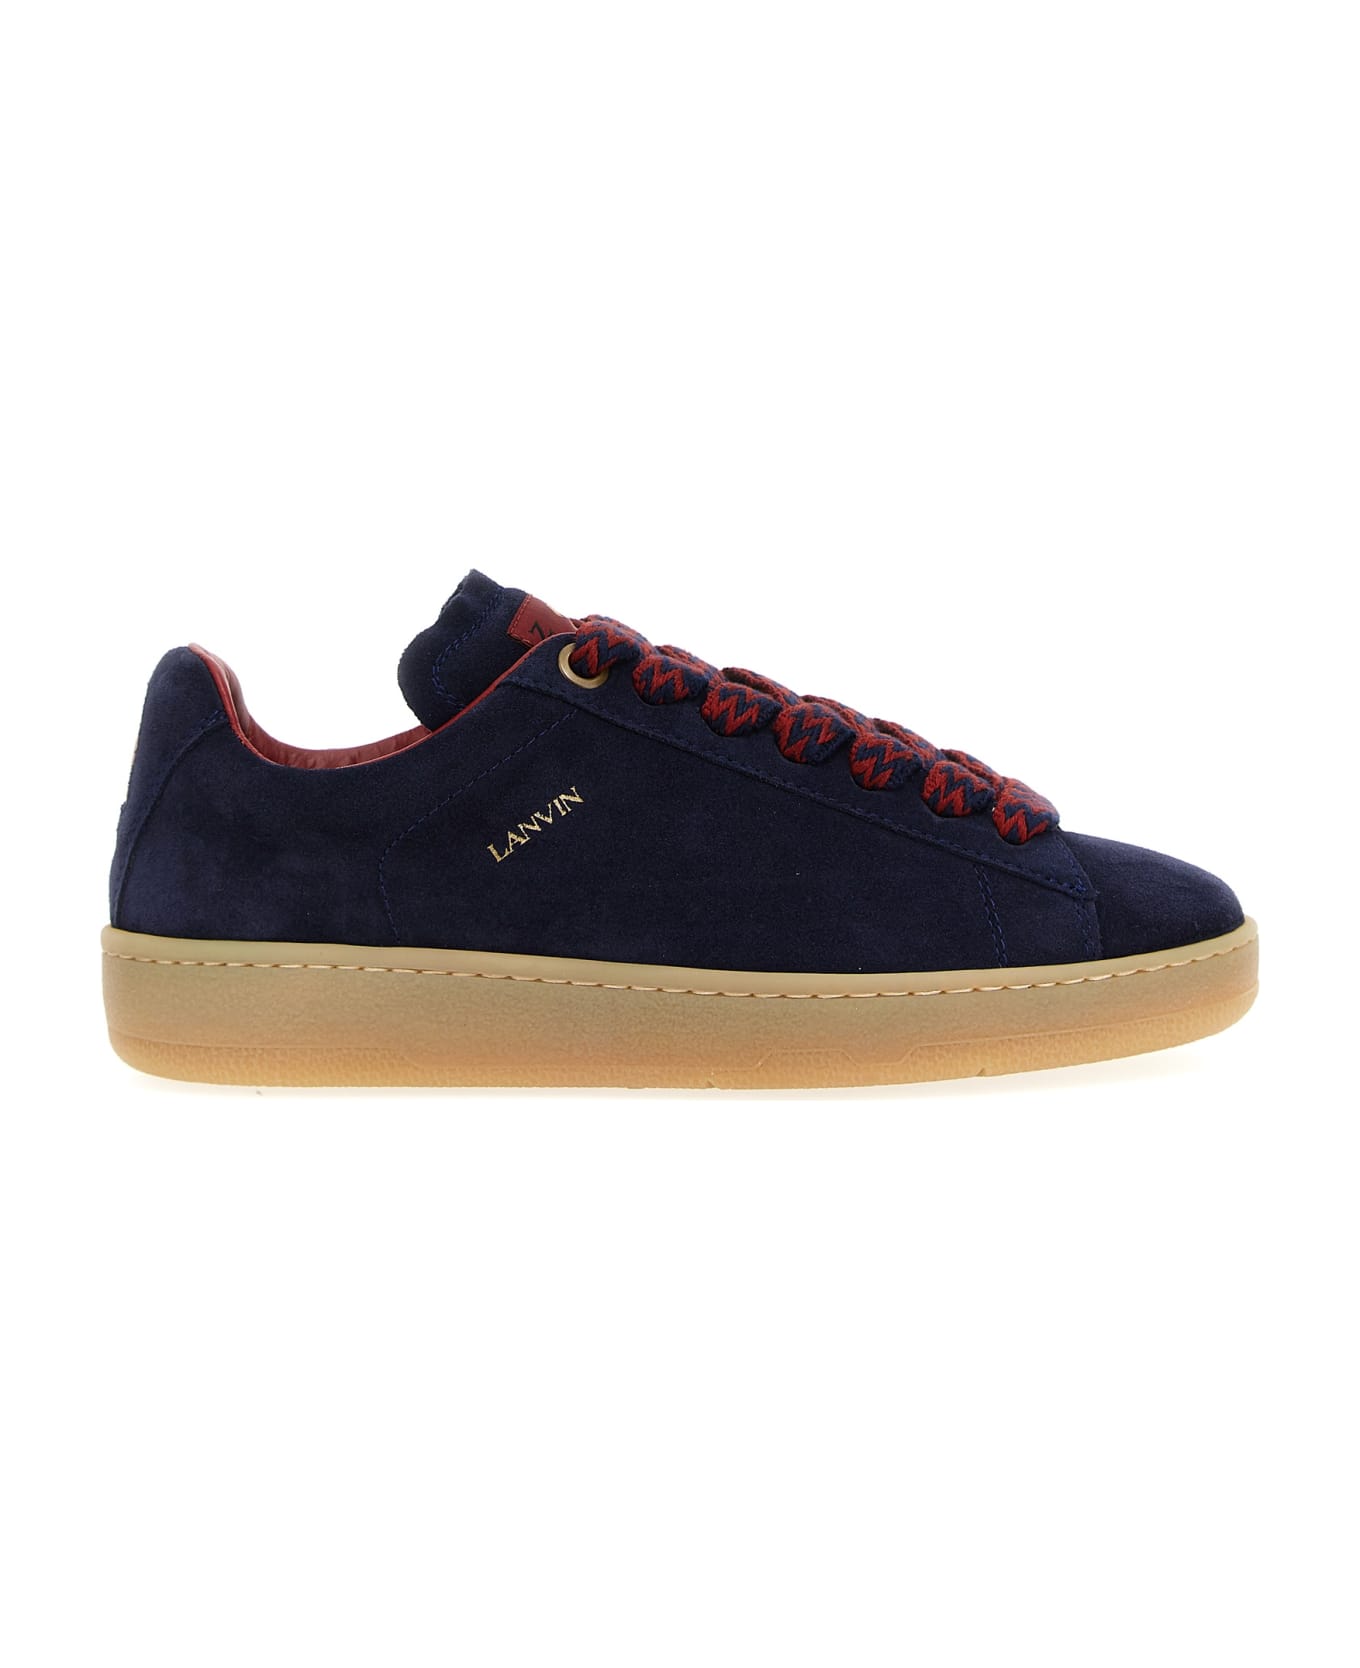 Lanvin 'lite Curb' Sneakers - Navy Blue/red スニーカー